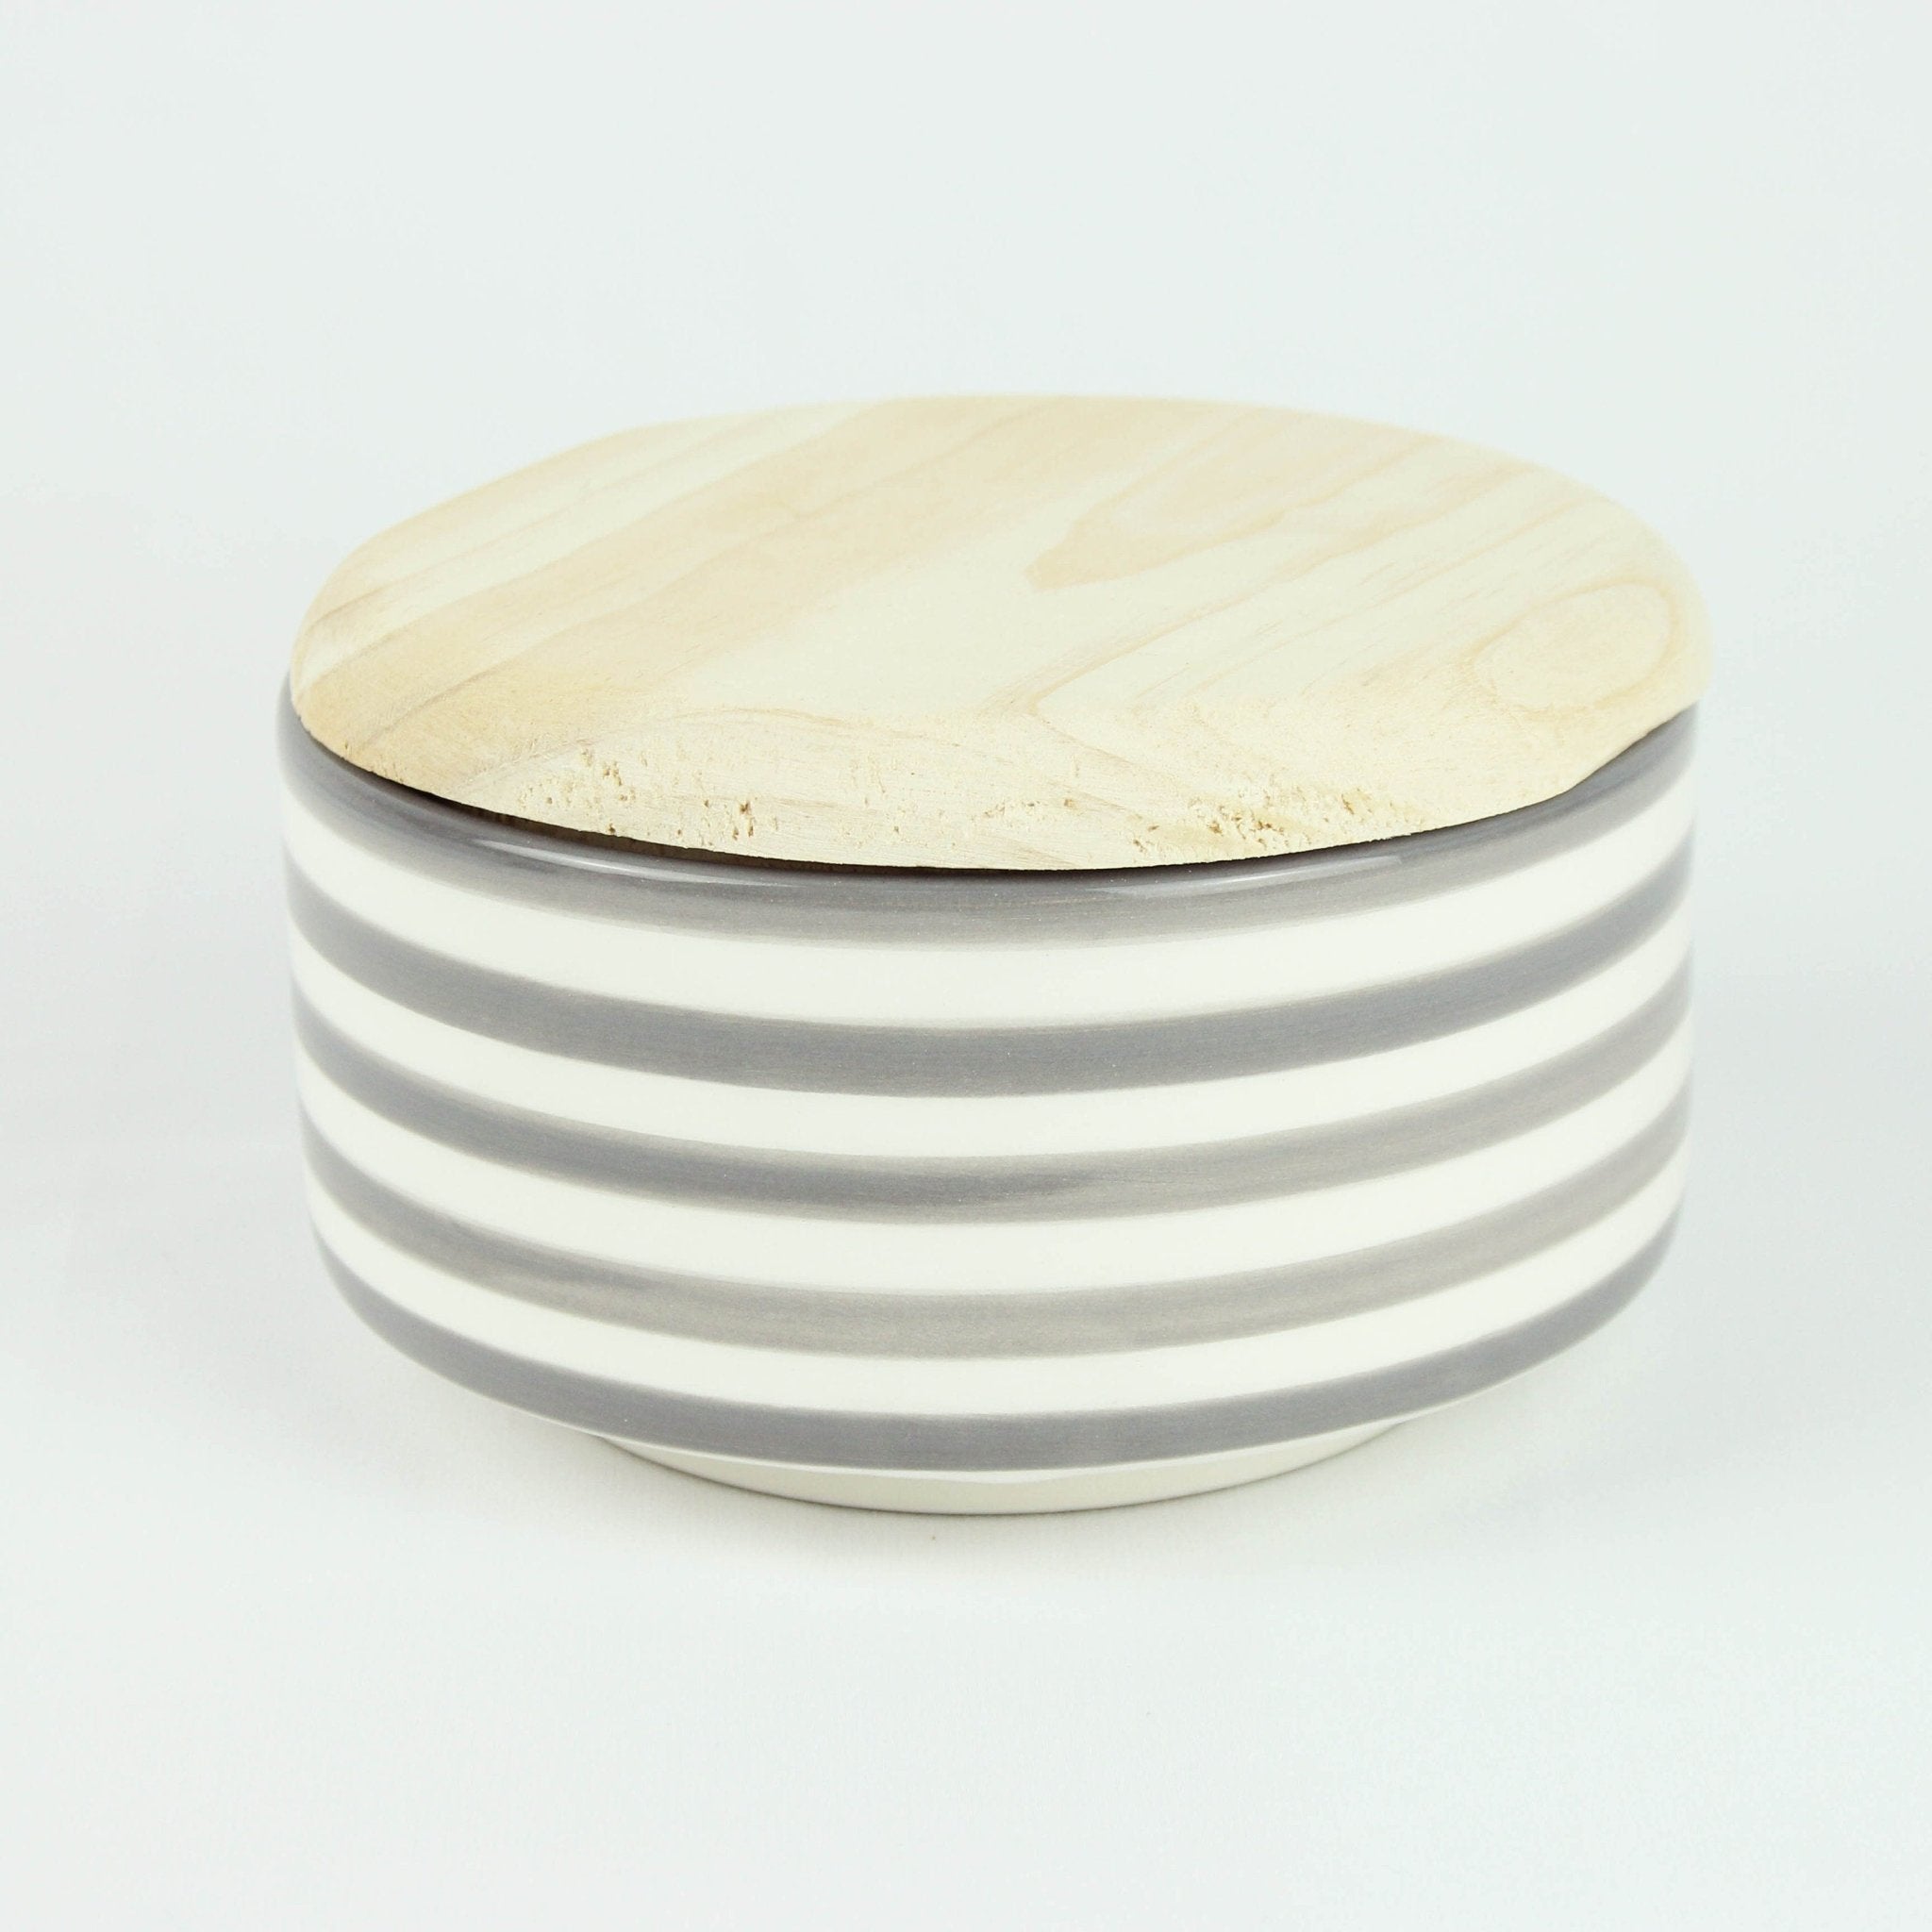 Striped Dish with wood lid - Artisan Stories